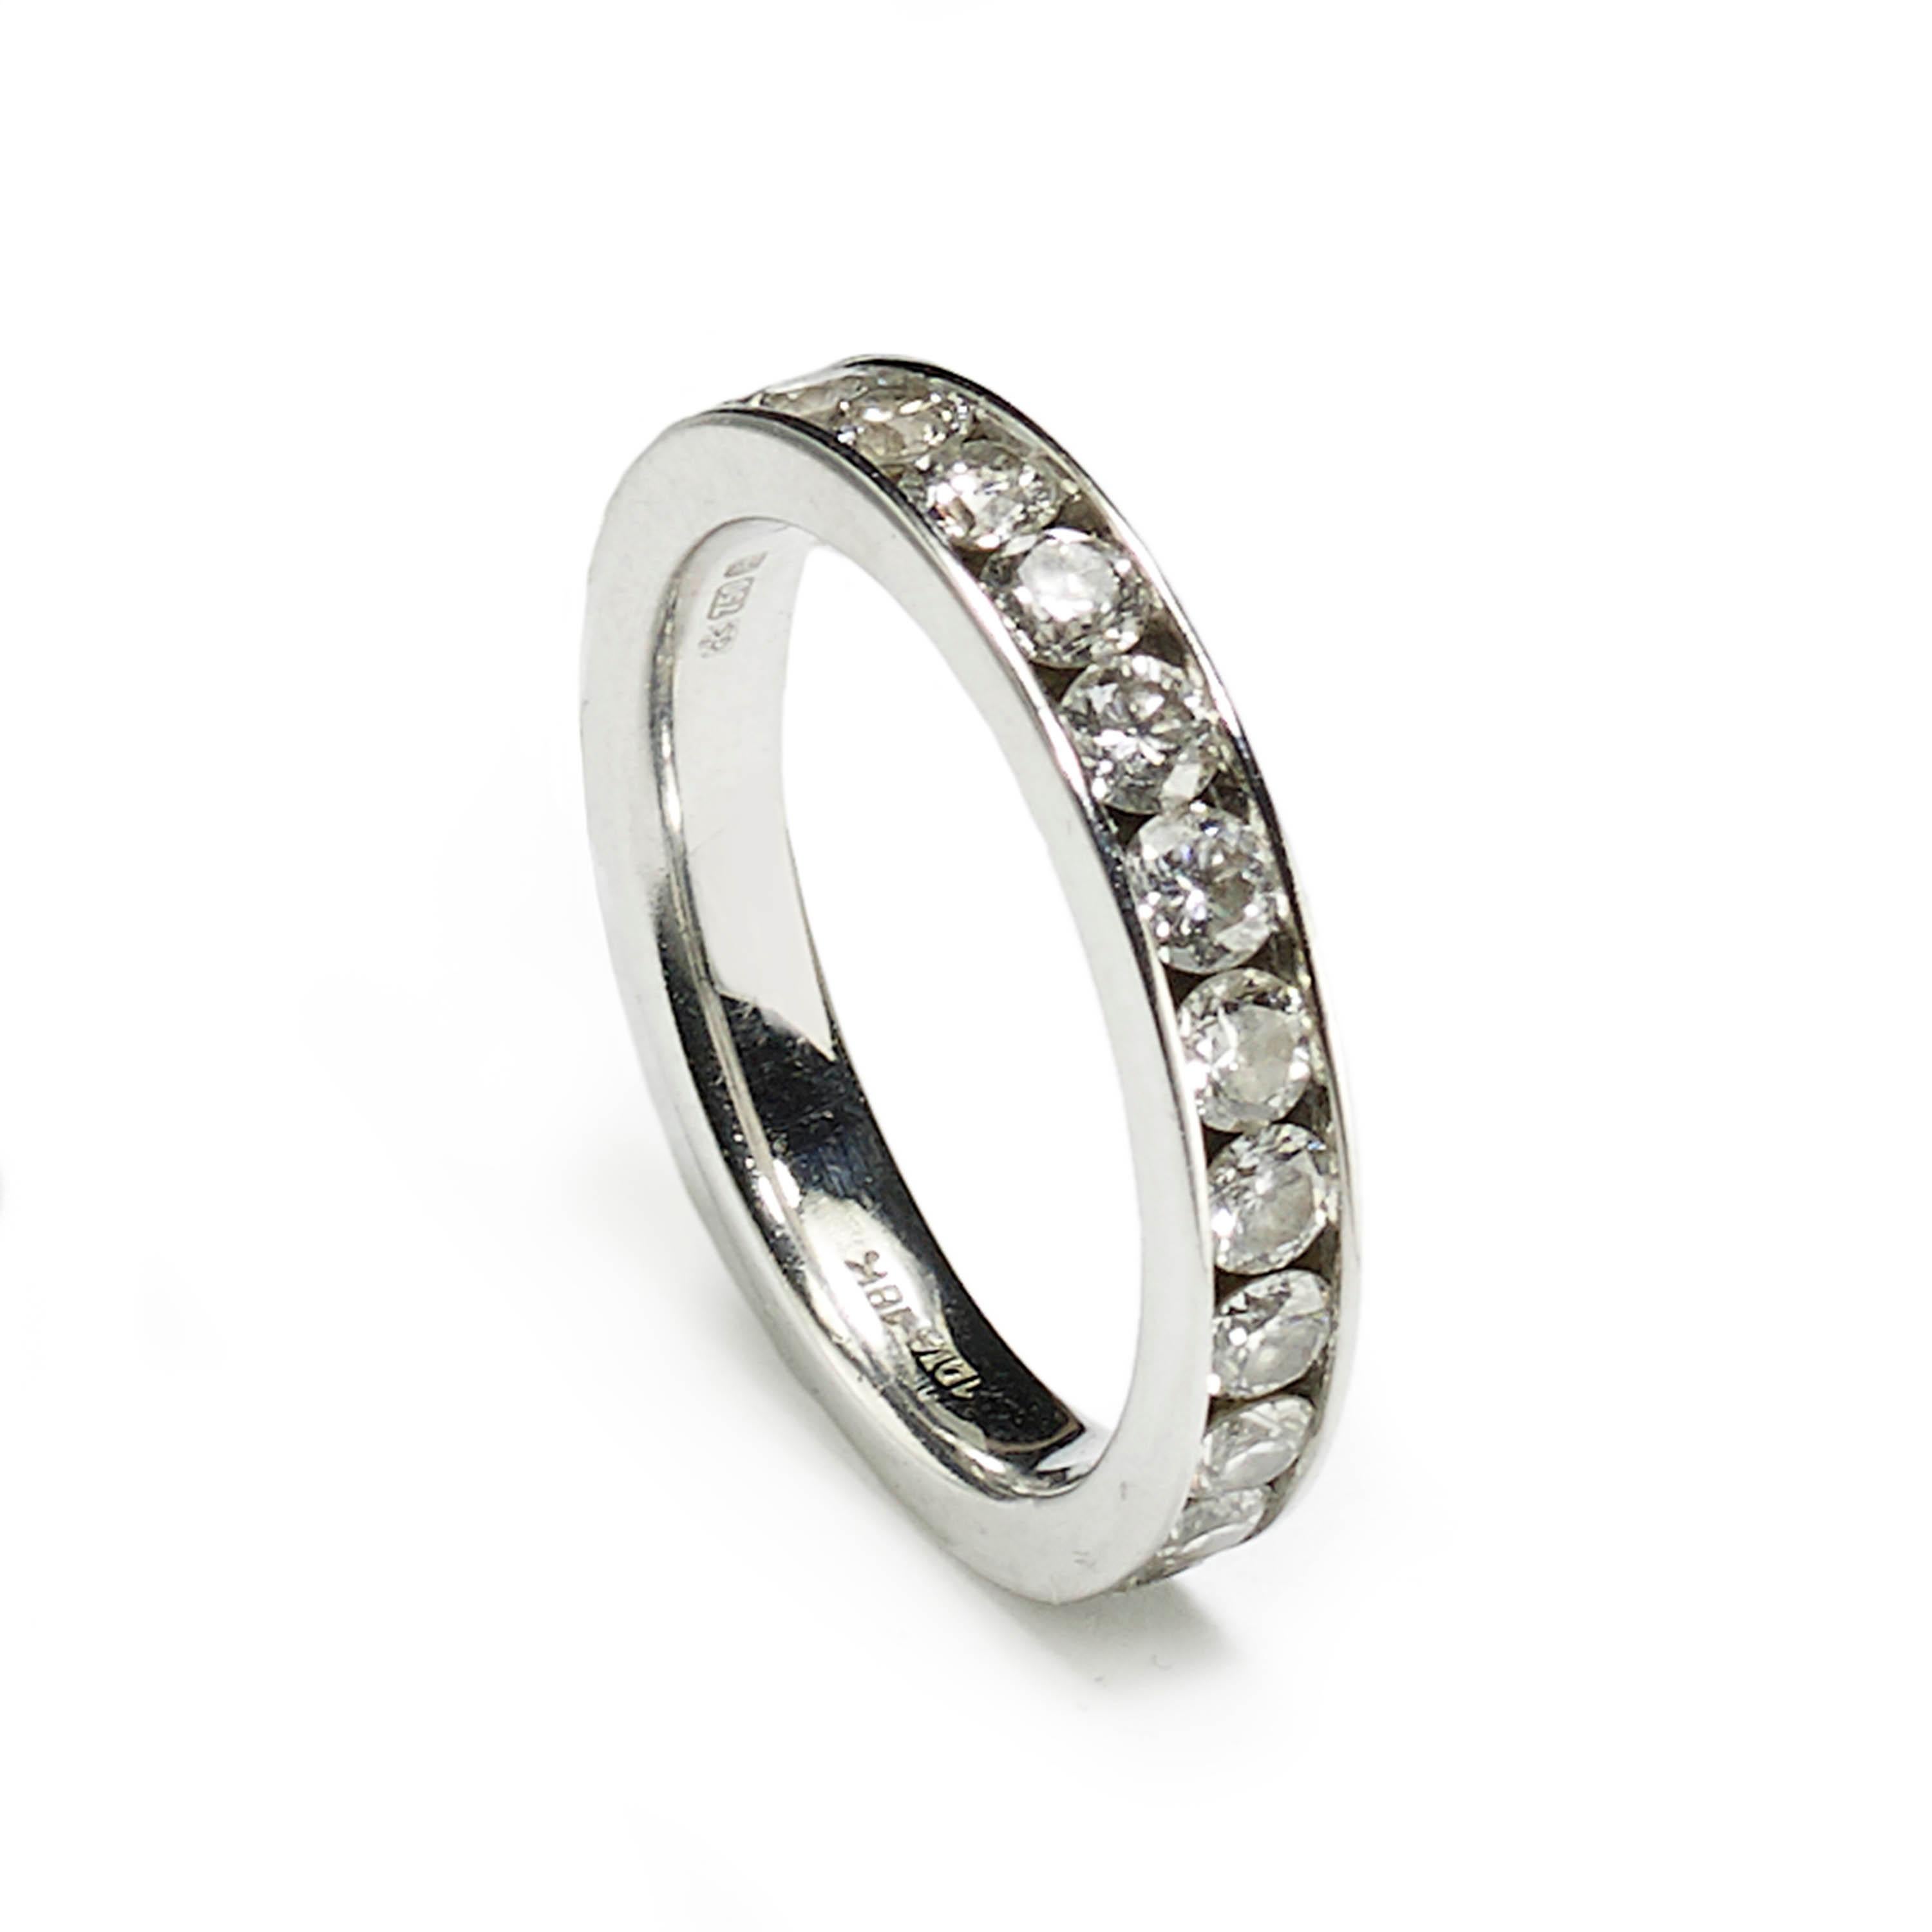 A diamond set half eternity ring, round brilliant-cut diamonds, weighing an estimated total of 1.04ct, in our opinion the colour and clarity are G-H, VS, in a channel setting, mounted in 18ct white gold.